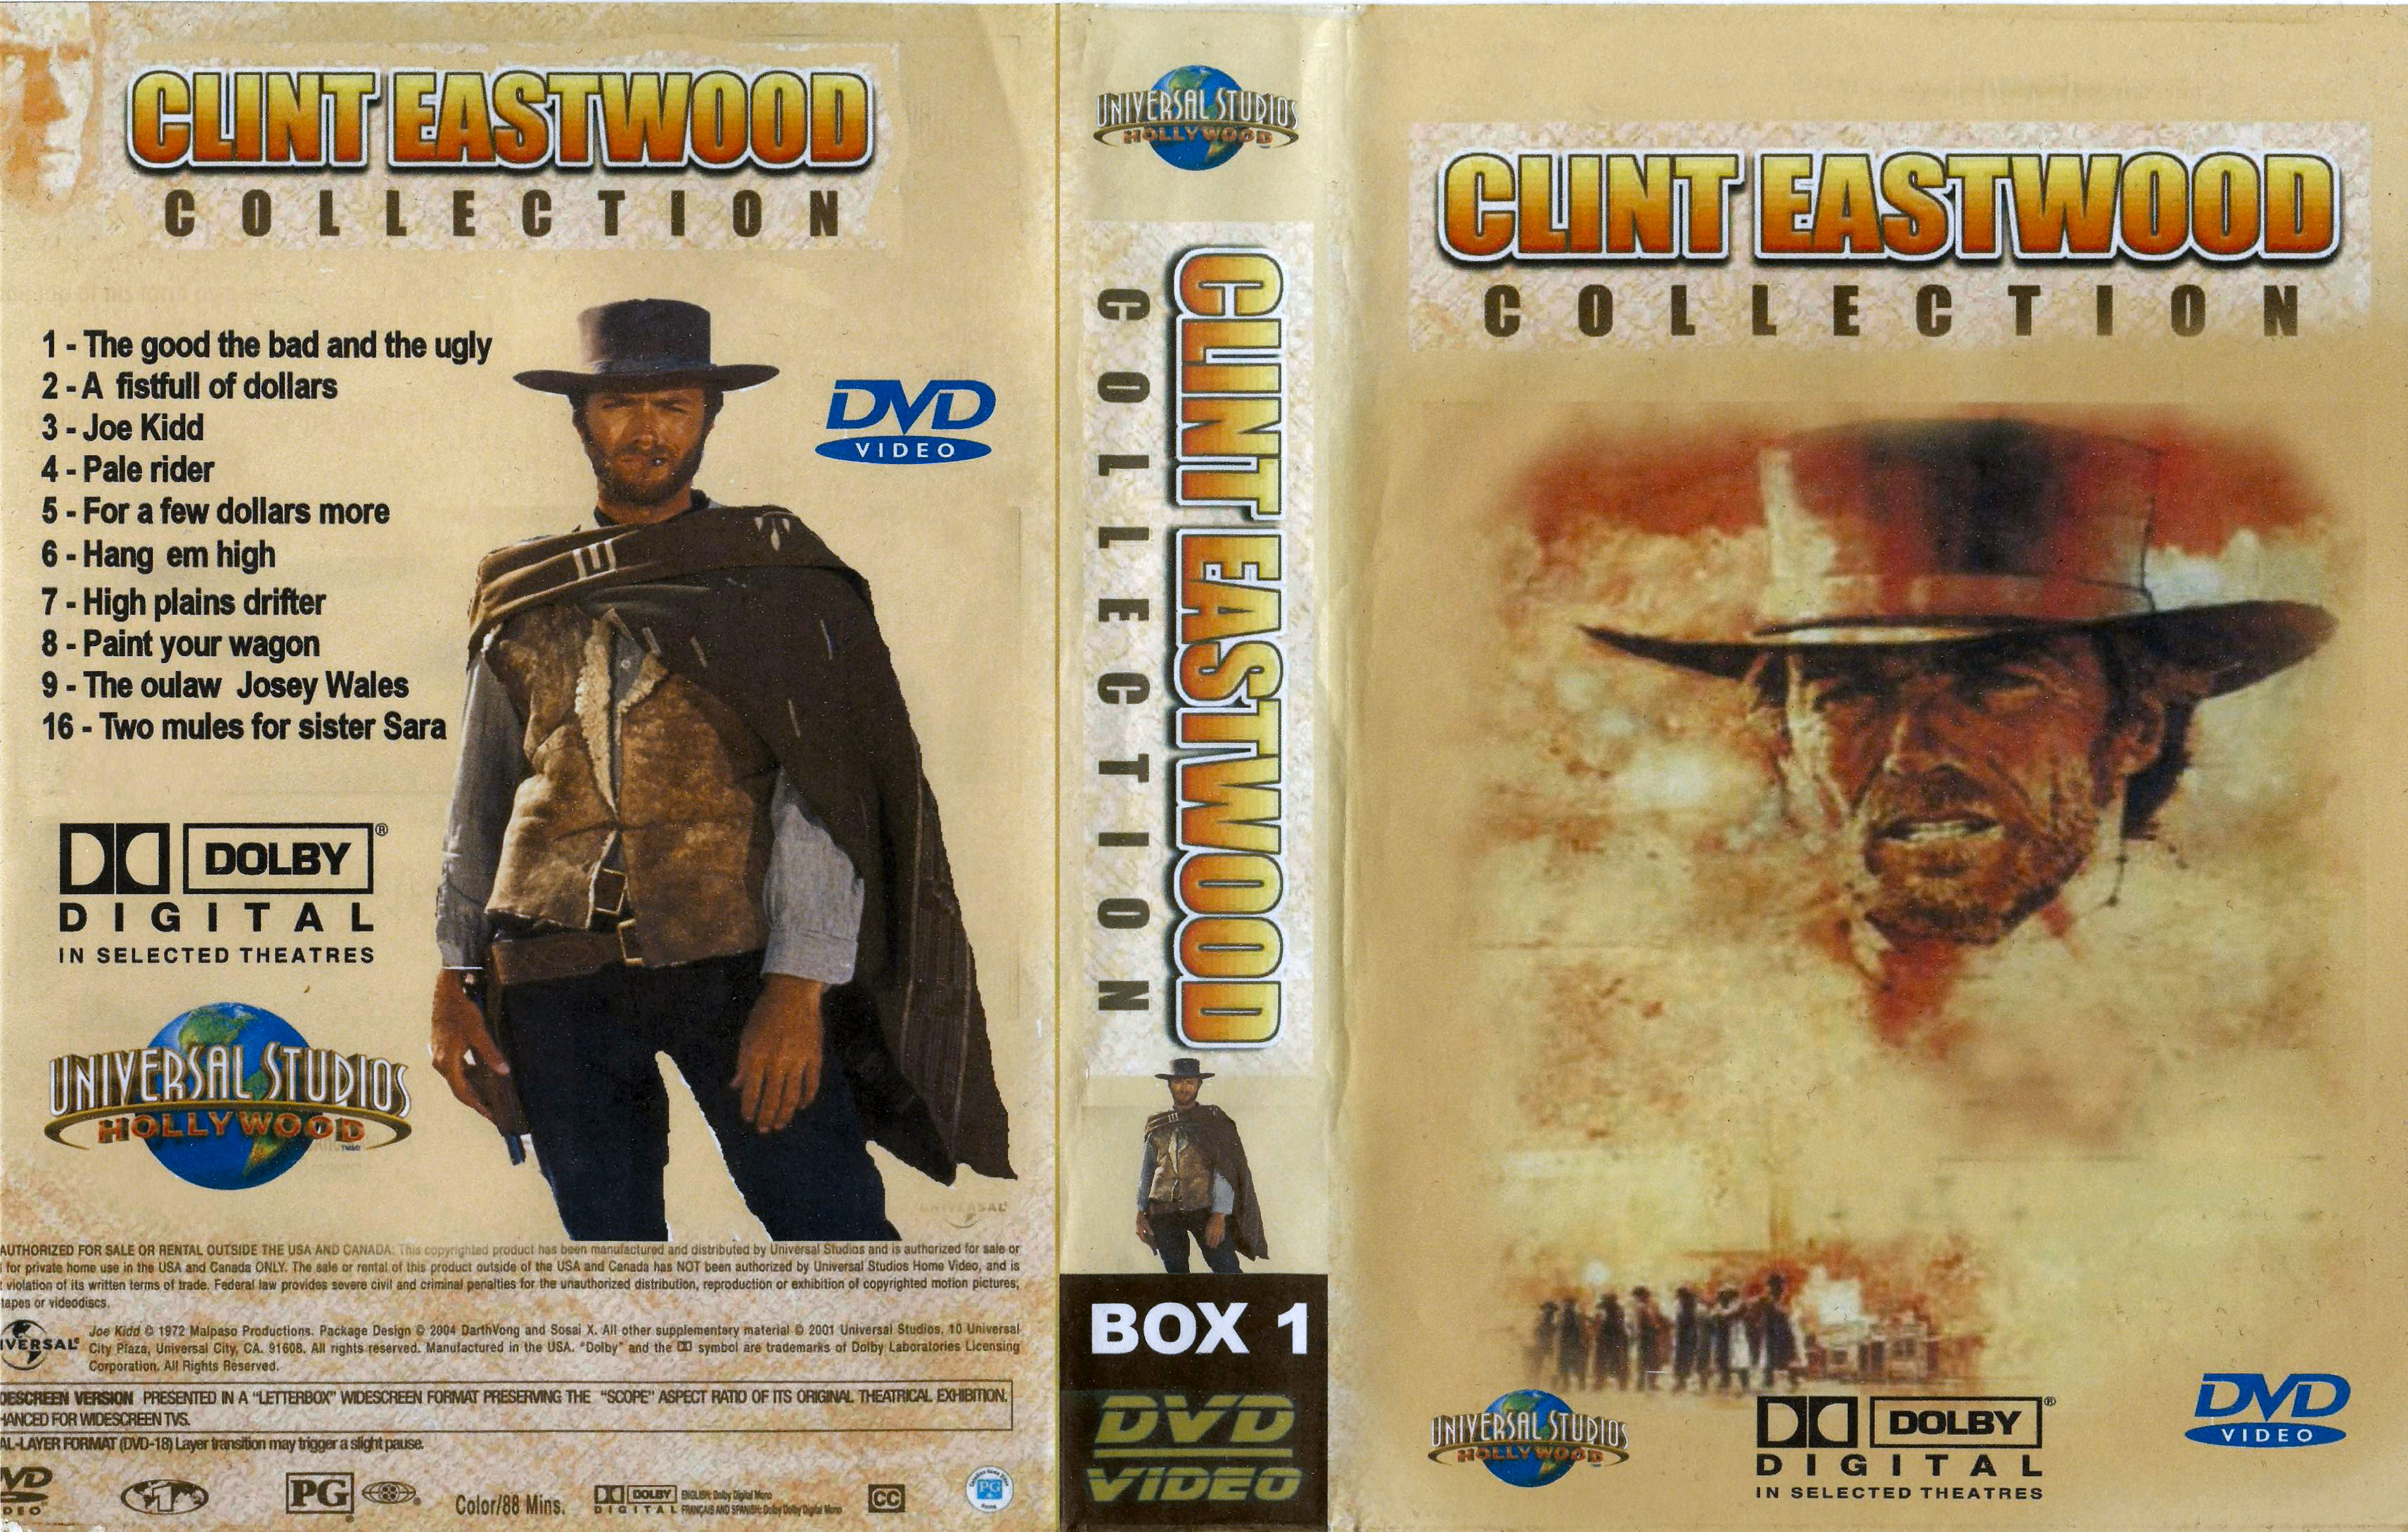 Clinf Easwood Collectie Box 1 DvD 1 van 10